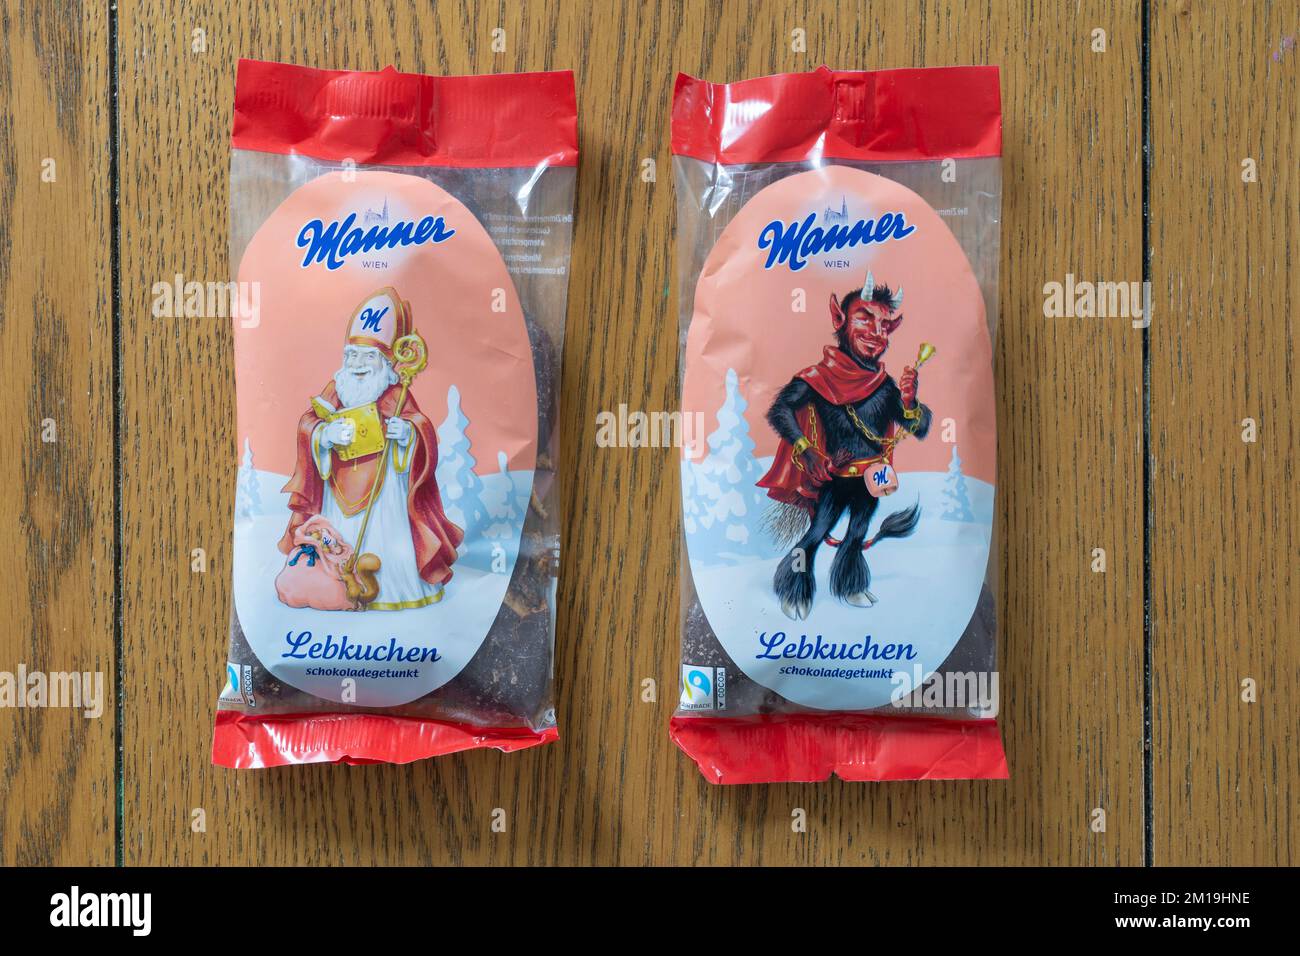 Manner chocolate representations of Saint Nicholas & his companion Knecht Ruprecht - the goat like Krampus - from German folklore. December tradition Stock Photo